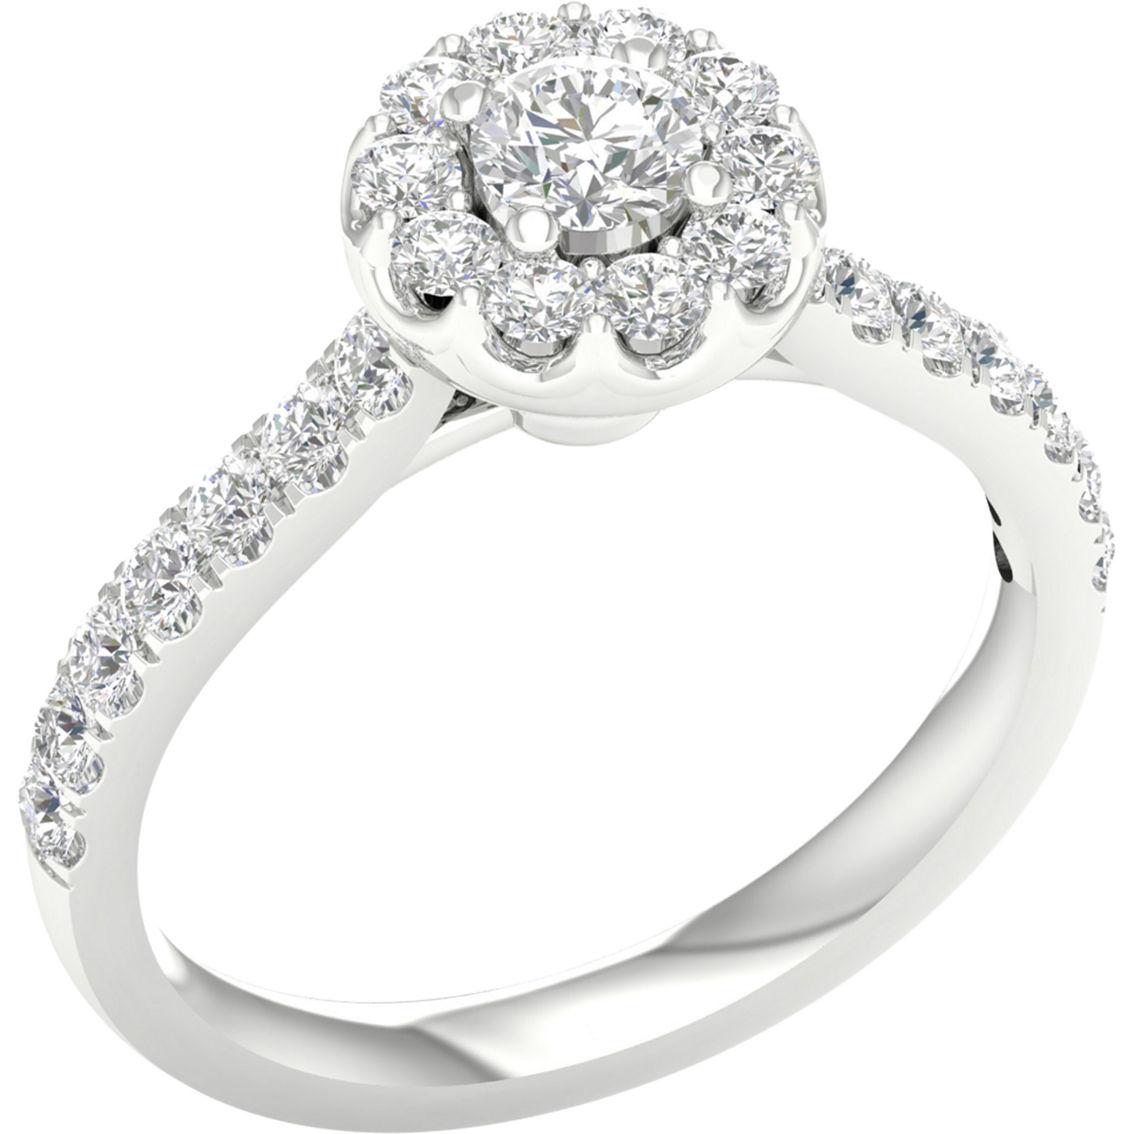 Pure Brilliance 14K Gold 1 CTW Lab Grown Diamond Ring with IGI Certification Size 7 - Image 2 of 2